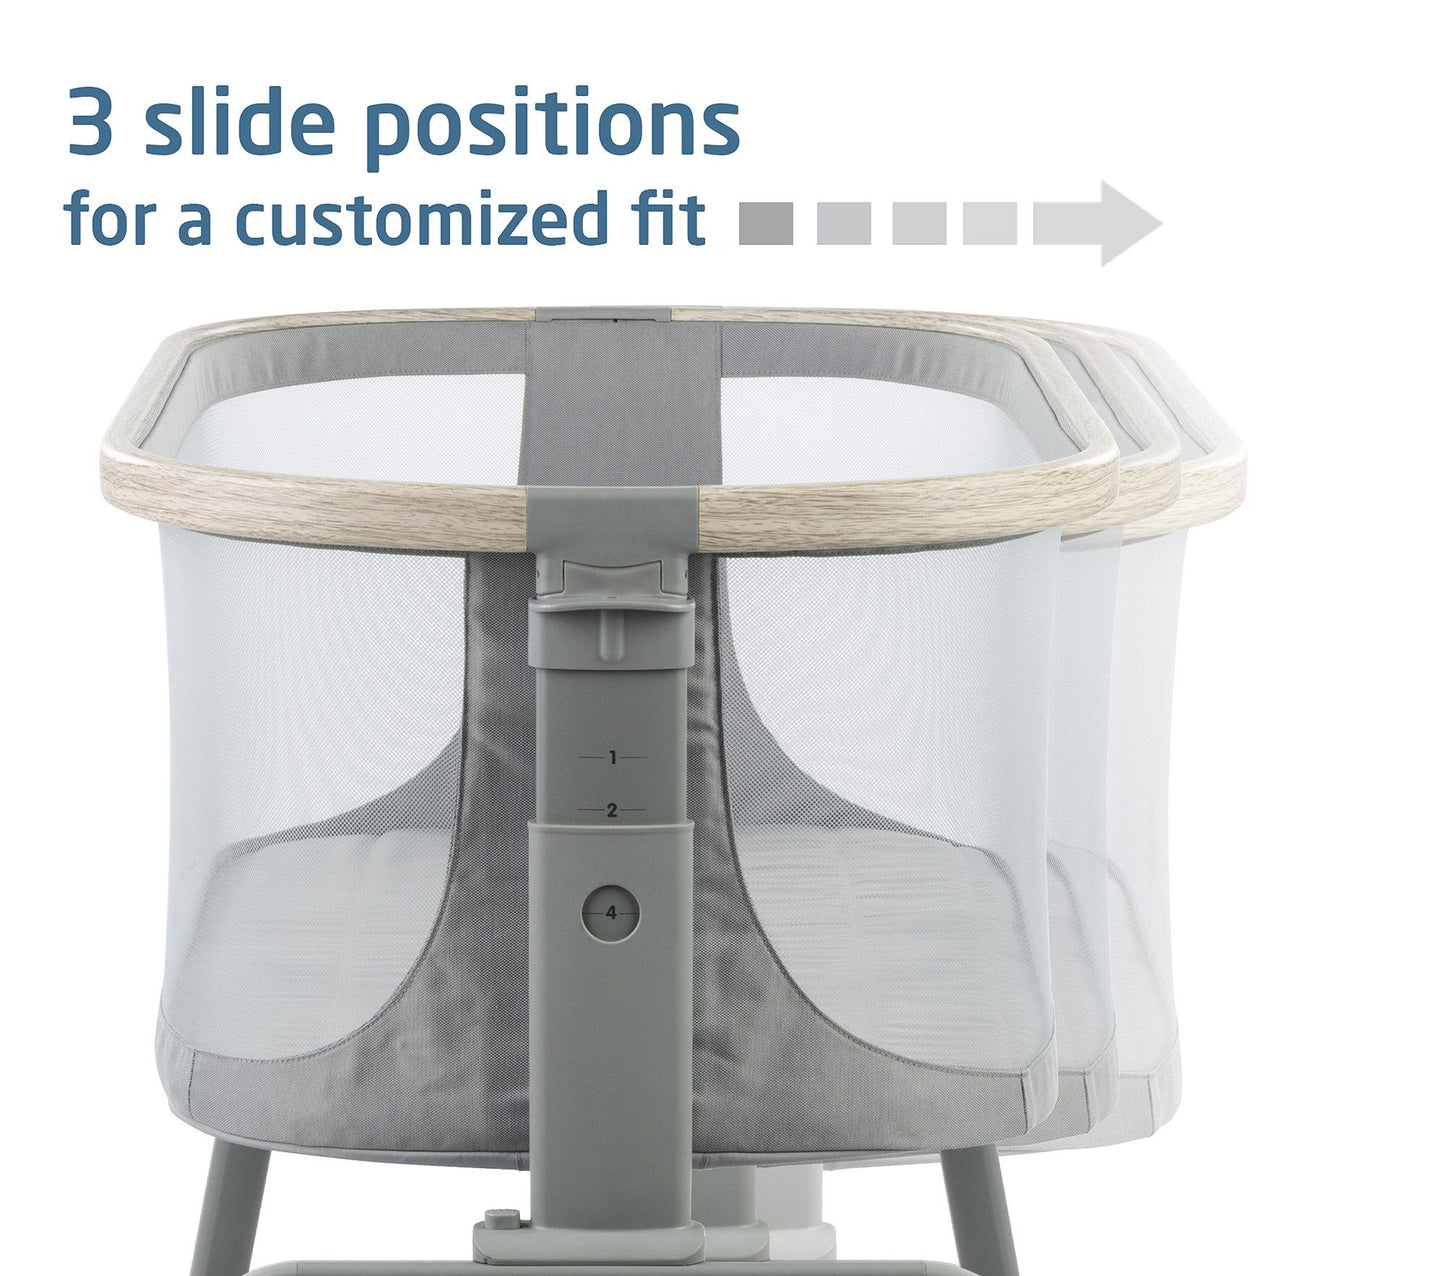 slide positions of Maxi-Cosi® Iora Newborn Bassinet with a large storage basket, showcasing its sleek design and sturdy frame